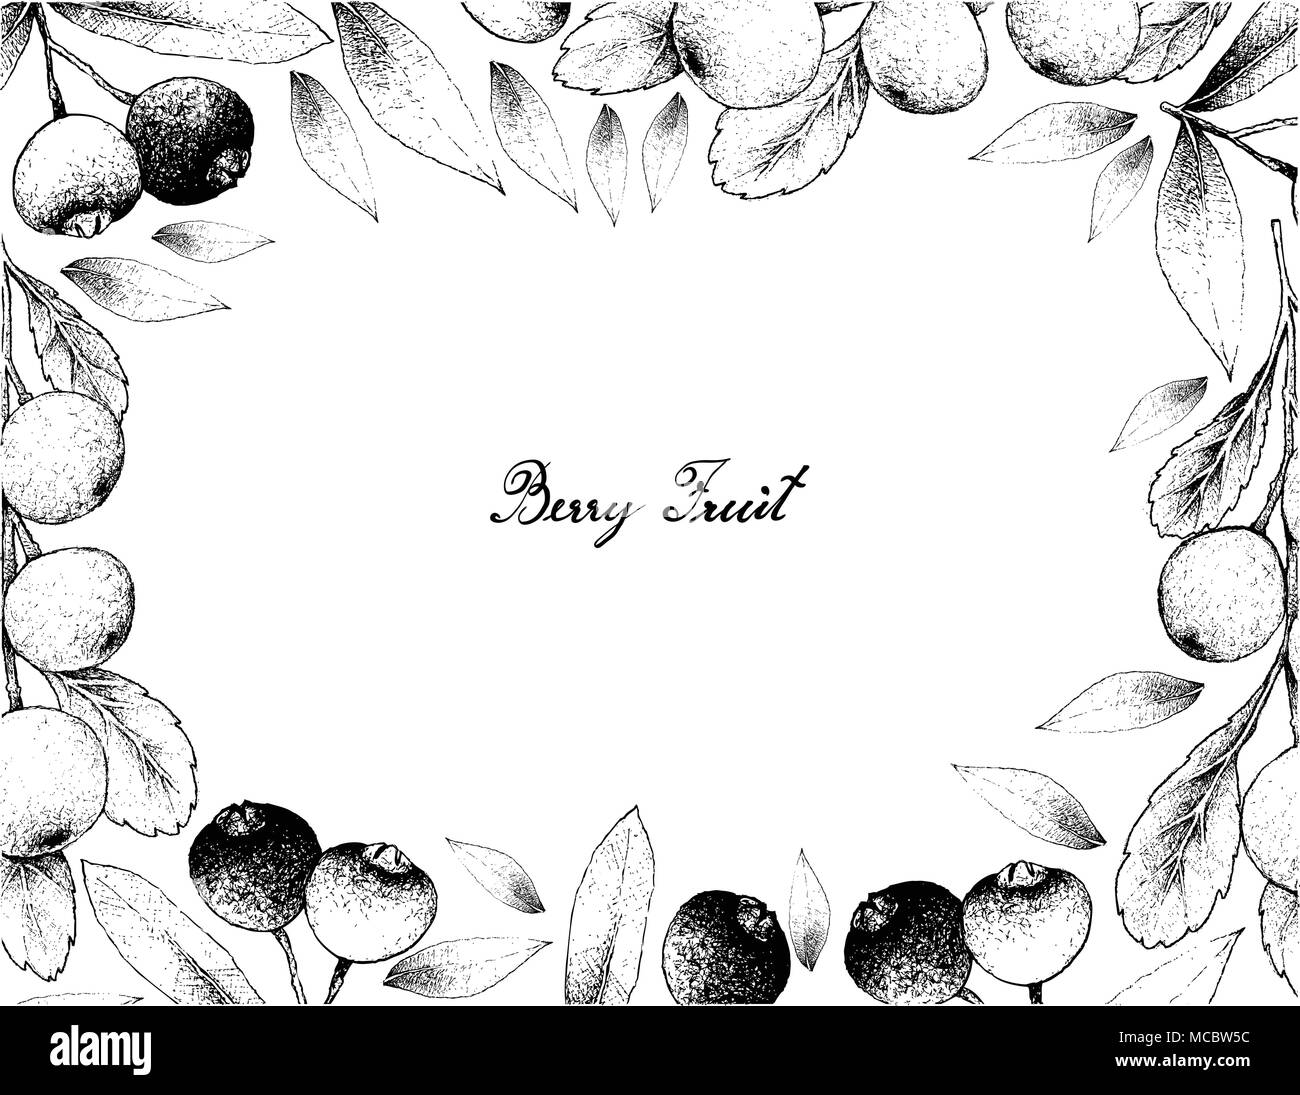 Berry Fruit, Illustration Frame of Hand Drawn Sketch of Red and Sweet Canthium Berberidifolium and Brush Cherry or Syzygium Australe Fruits Isolated o Stock Vector